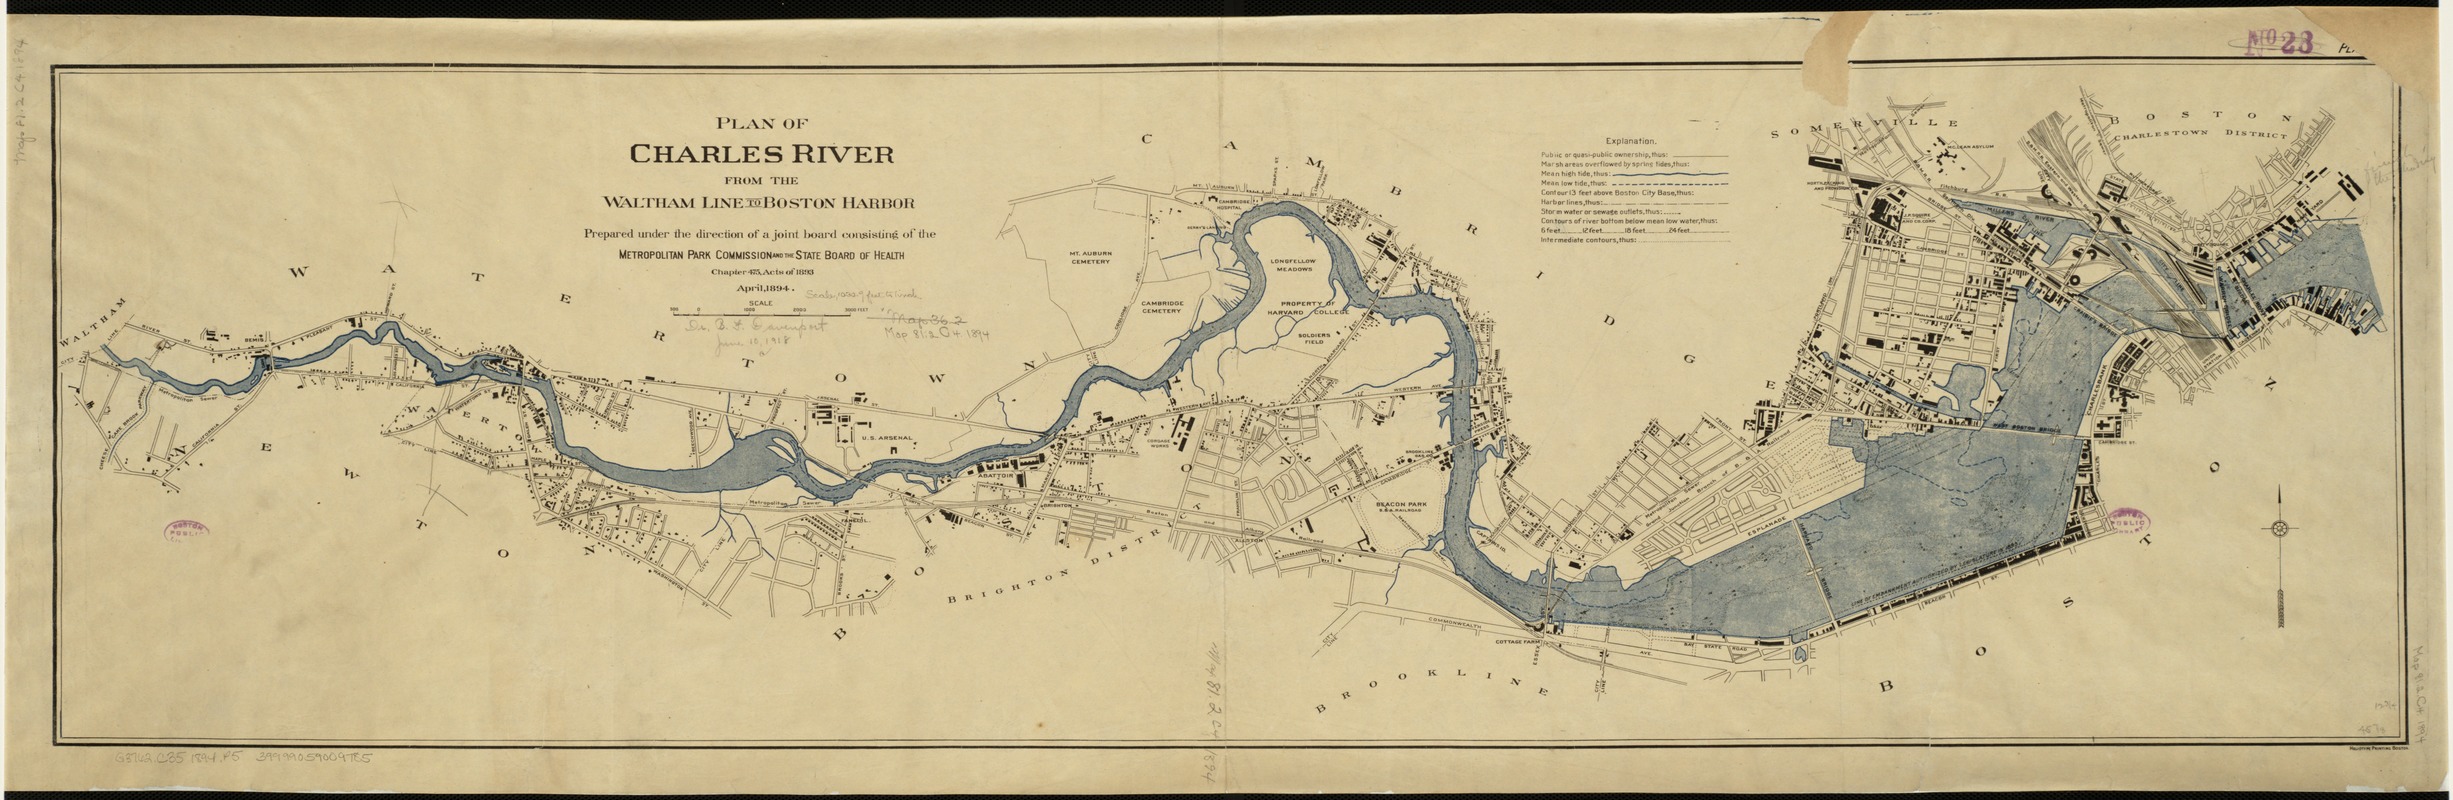 Plan of Charles River